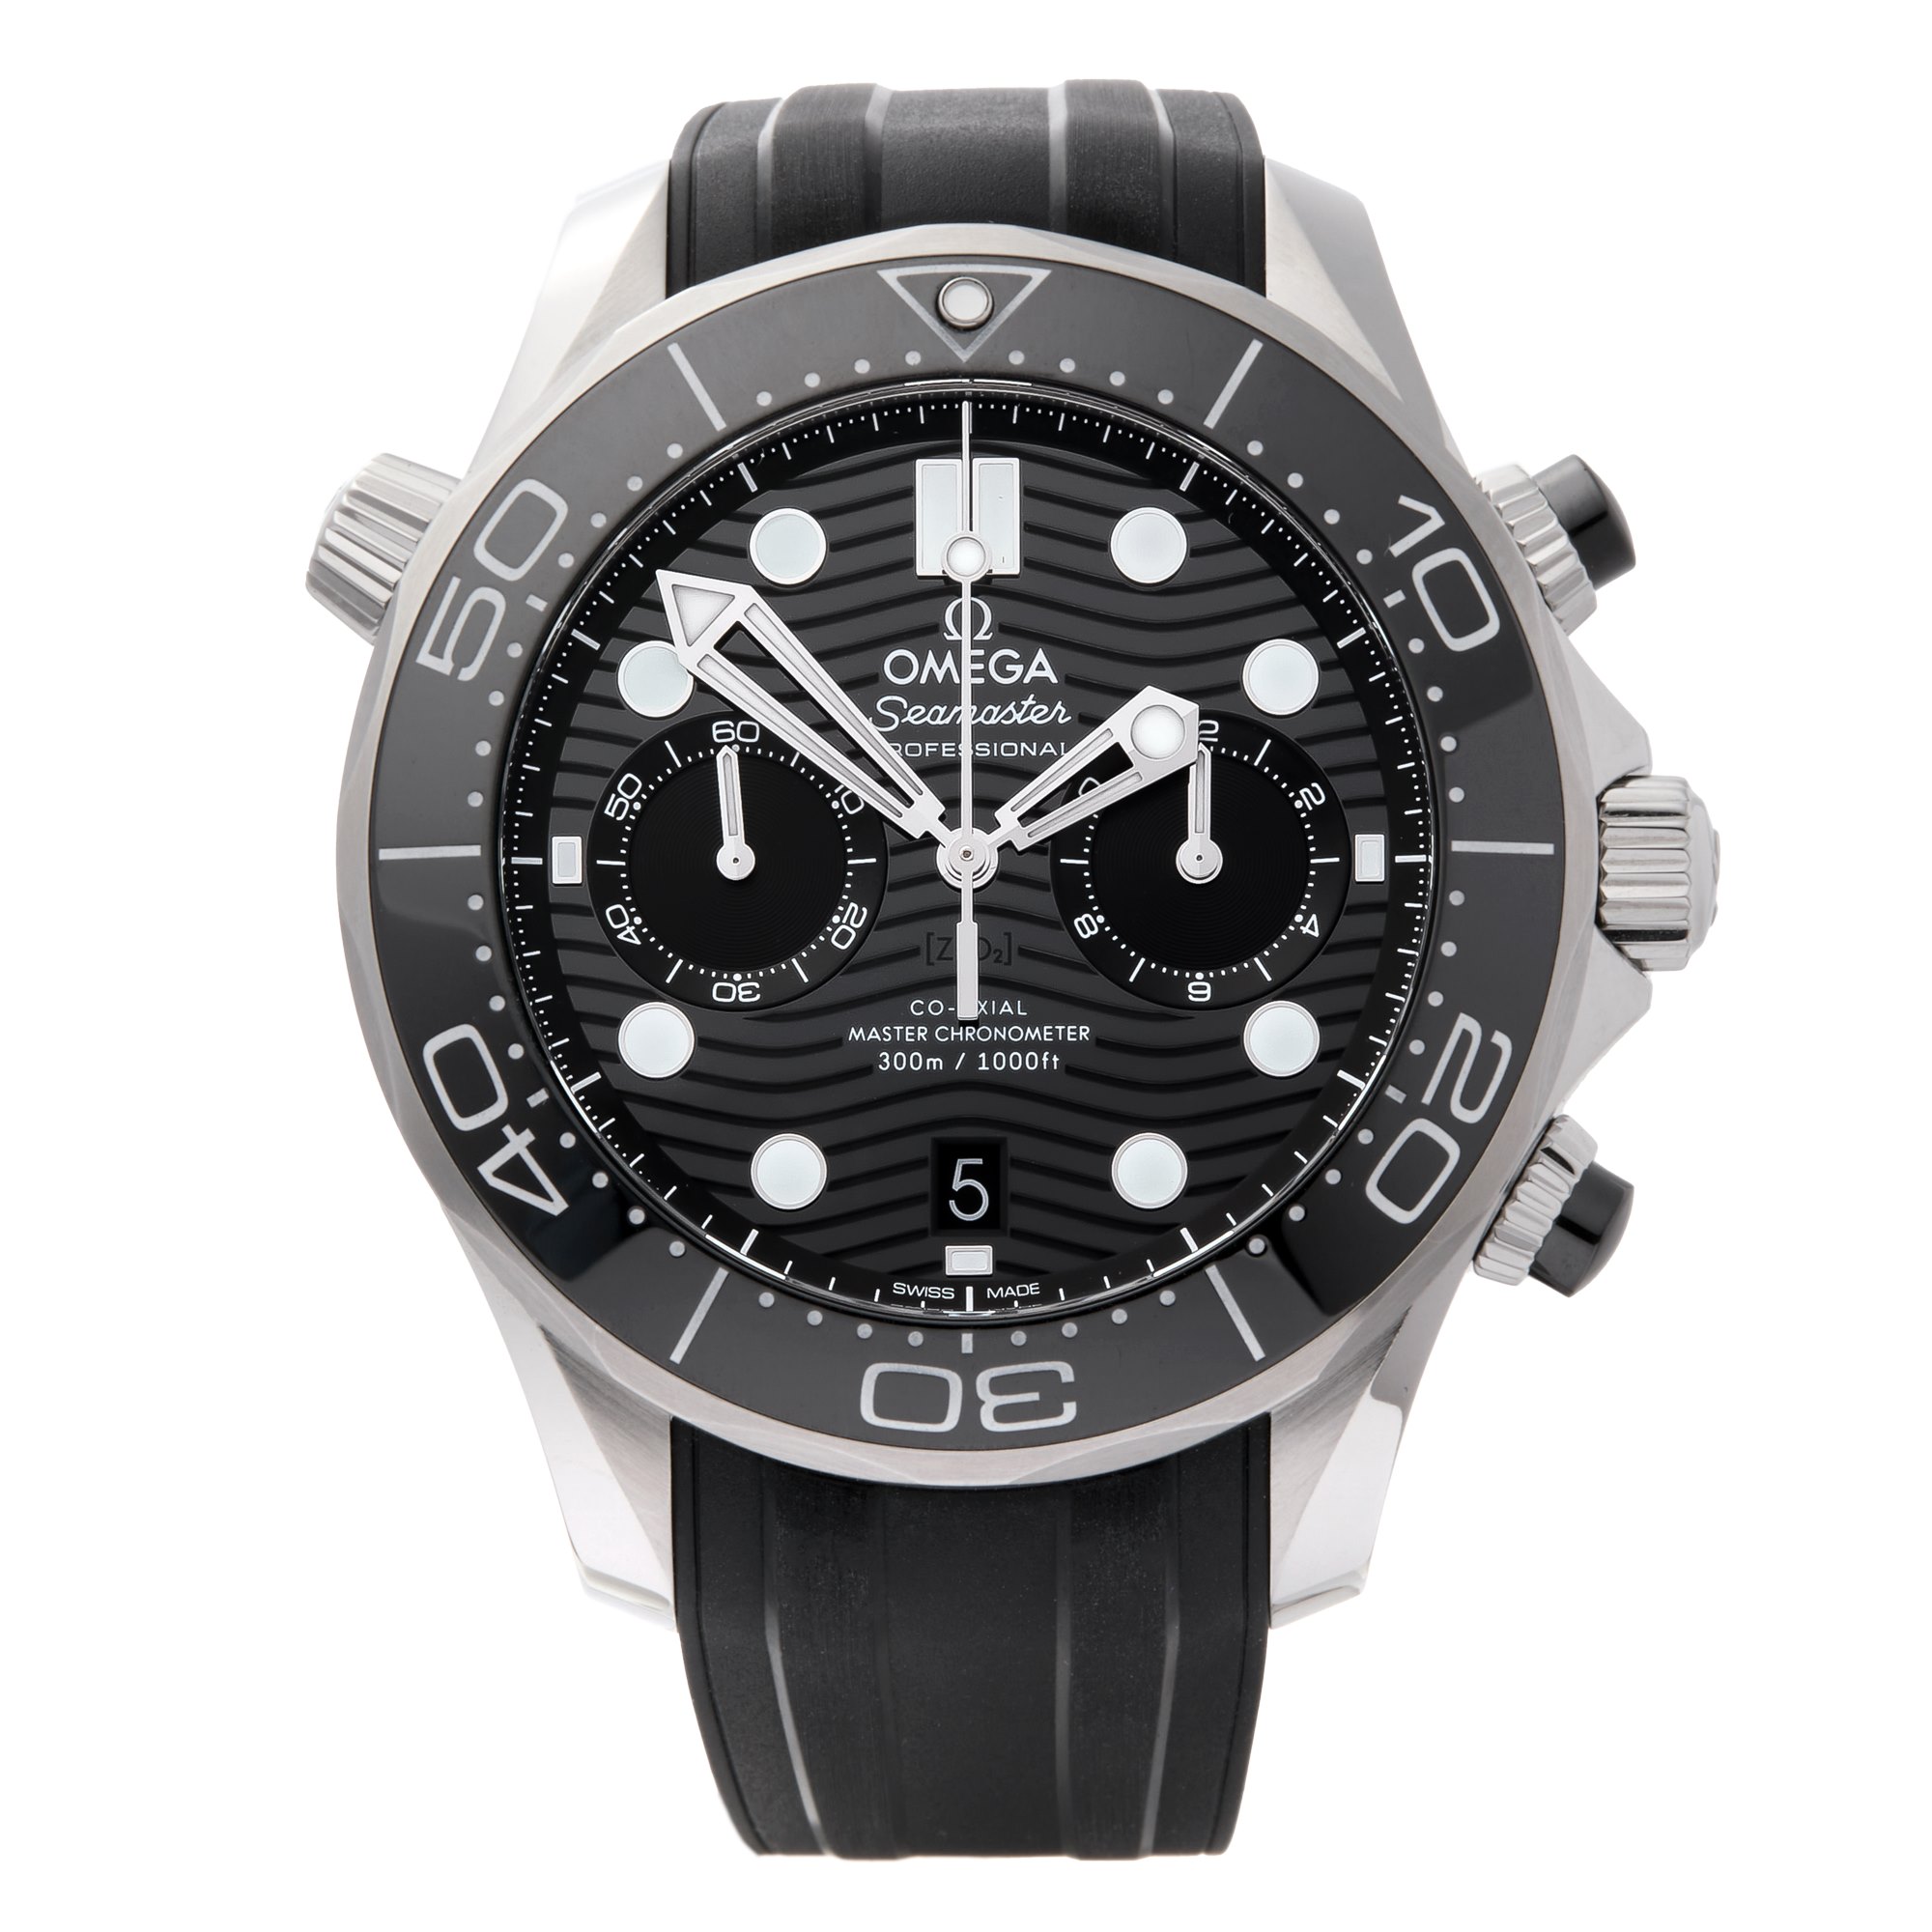 Omega Seamaster Chronograph Roestvrij Staal 210.32.44.51.01.001